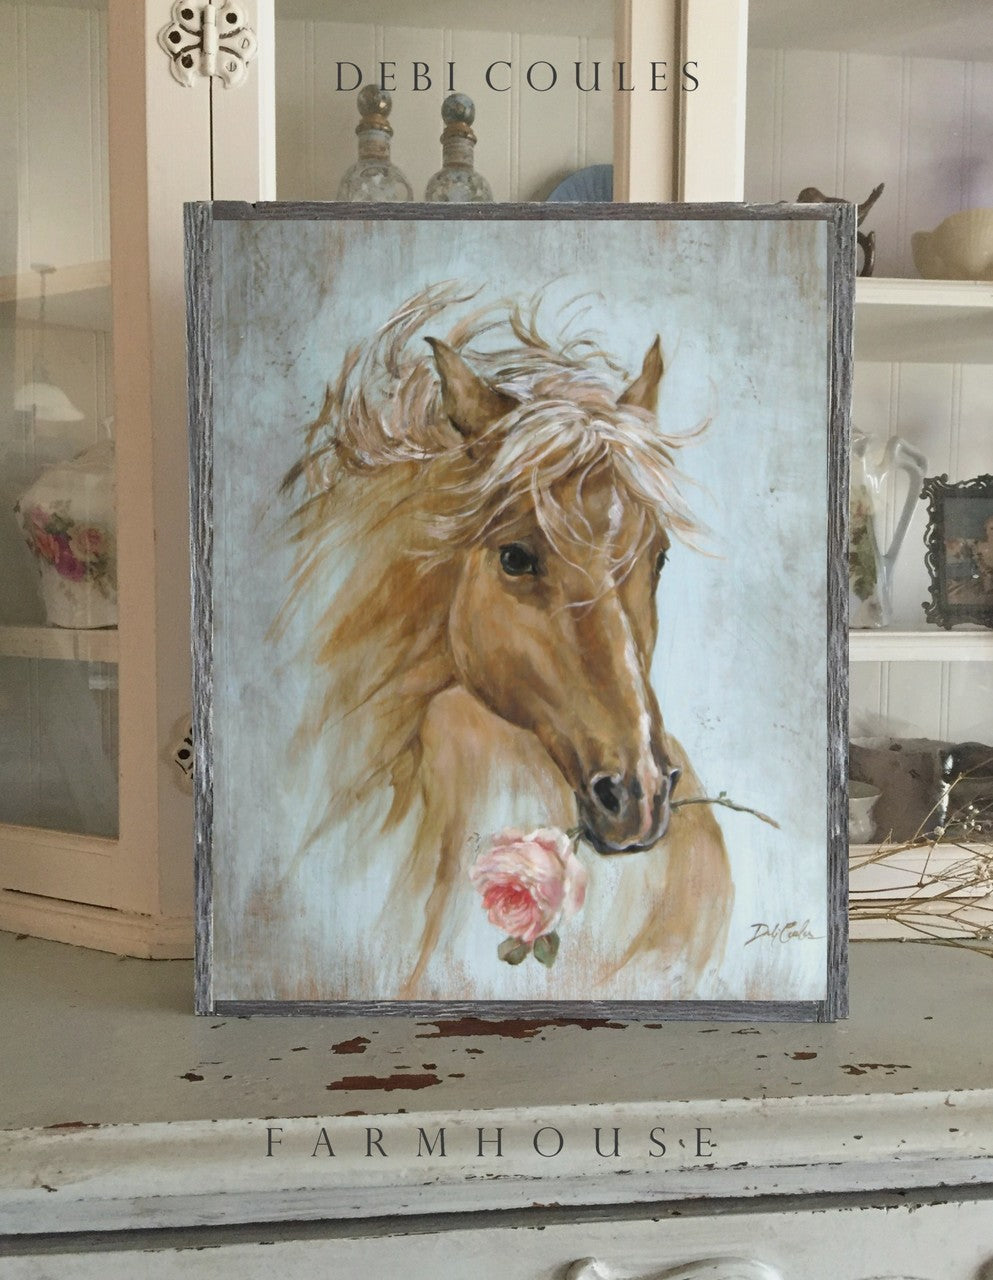 A Palimino stallion, golden mane flowing over a blue green distressed vintage background with a pink rose clutched in its mouth, framed in barn wood style frame, Debi Coules artist, Shabby chic, Cottage chic, farmhouse chic. 1.5 inch deep wall decor.